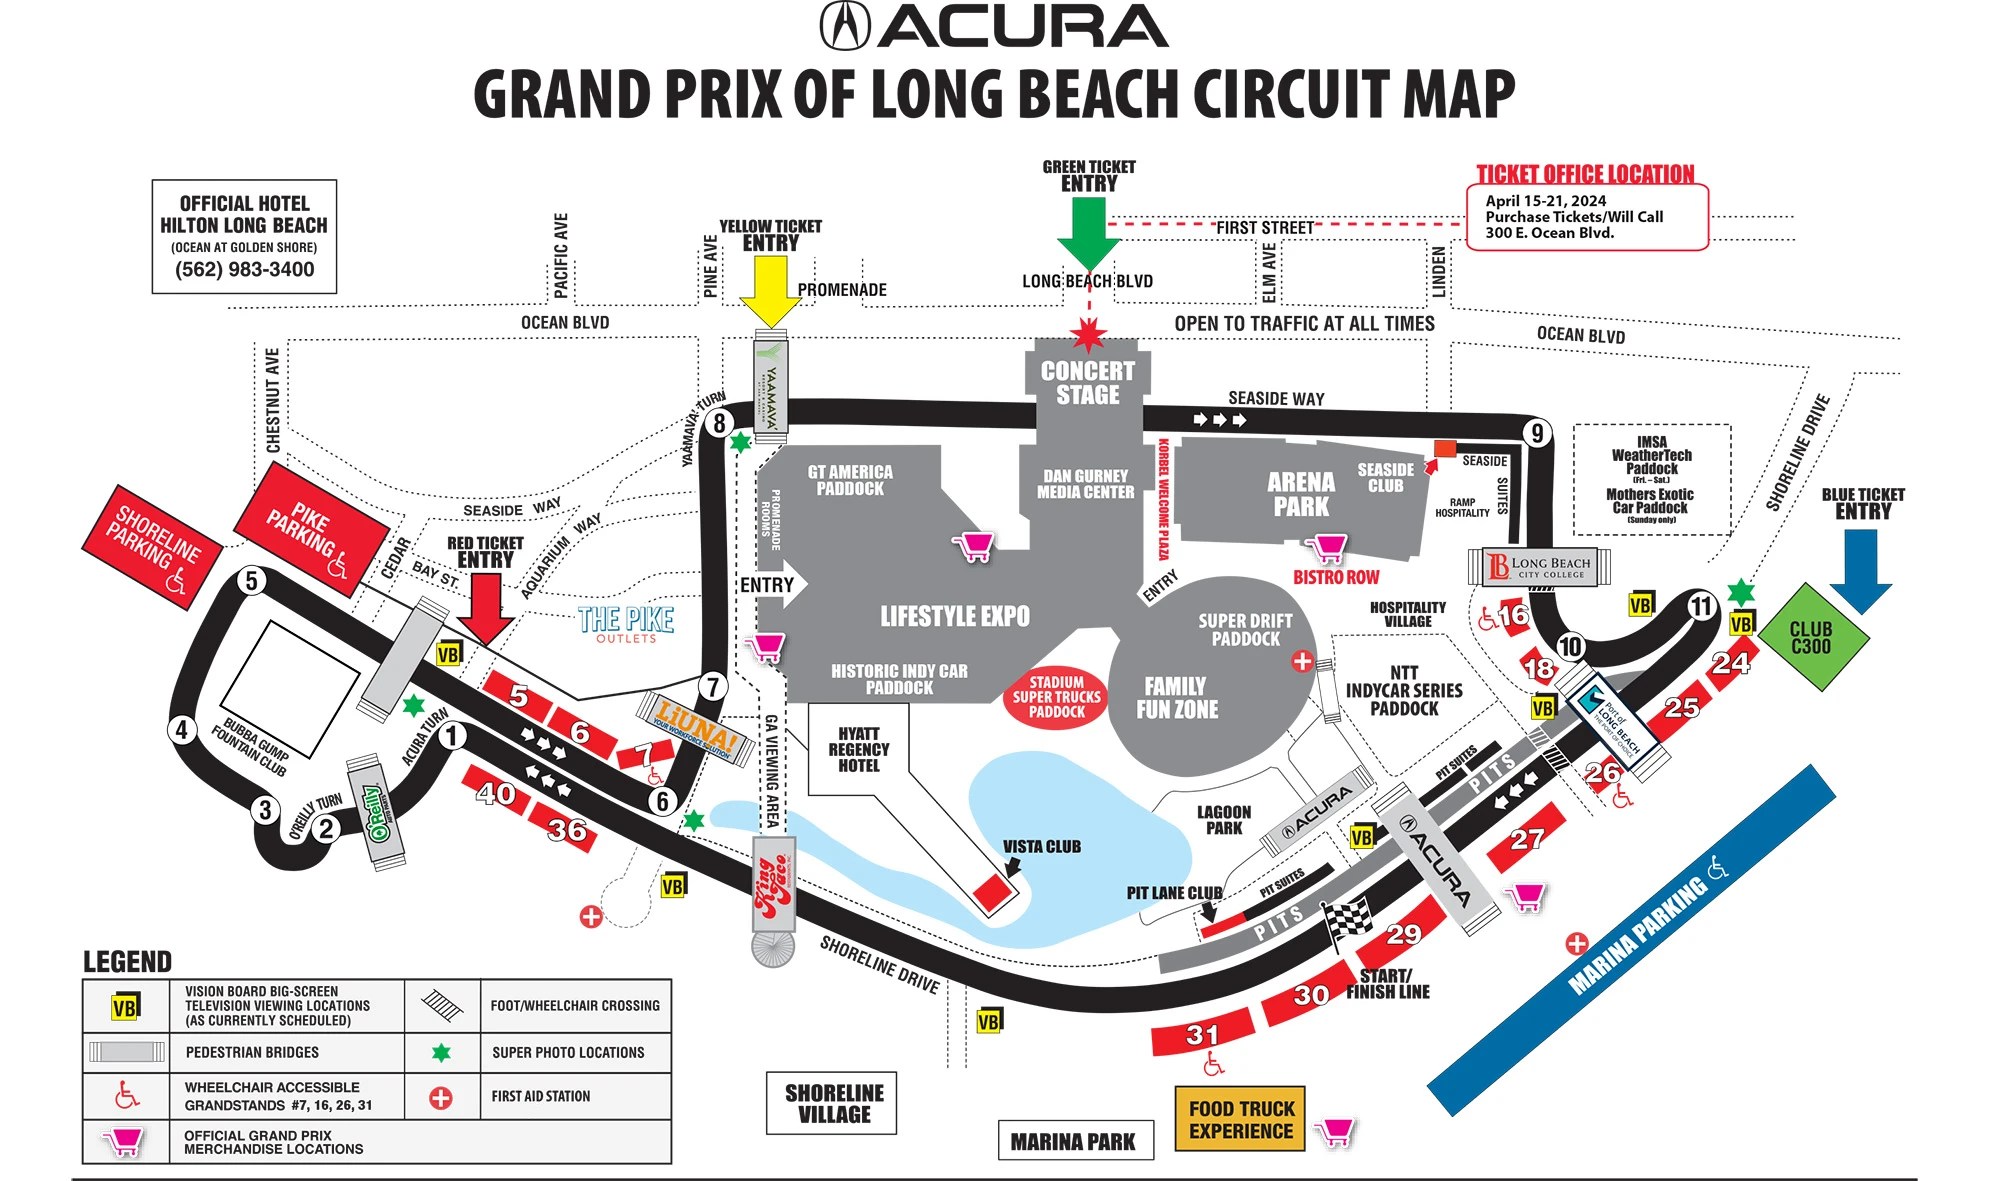 A map of the Long Beach Grand Prix circuit.